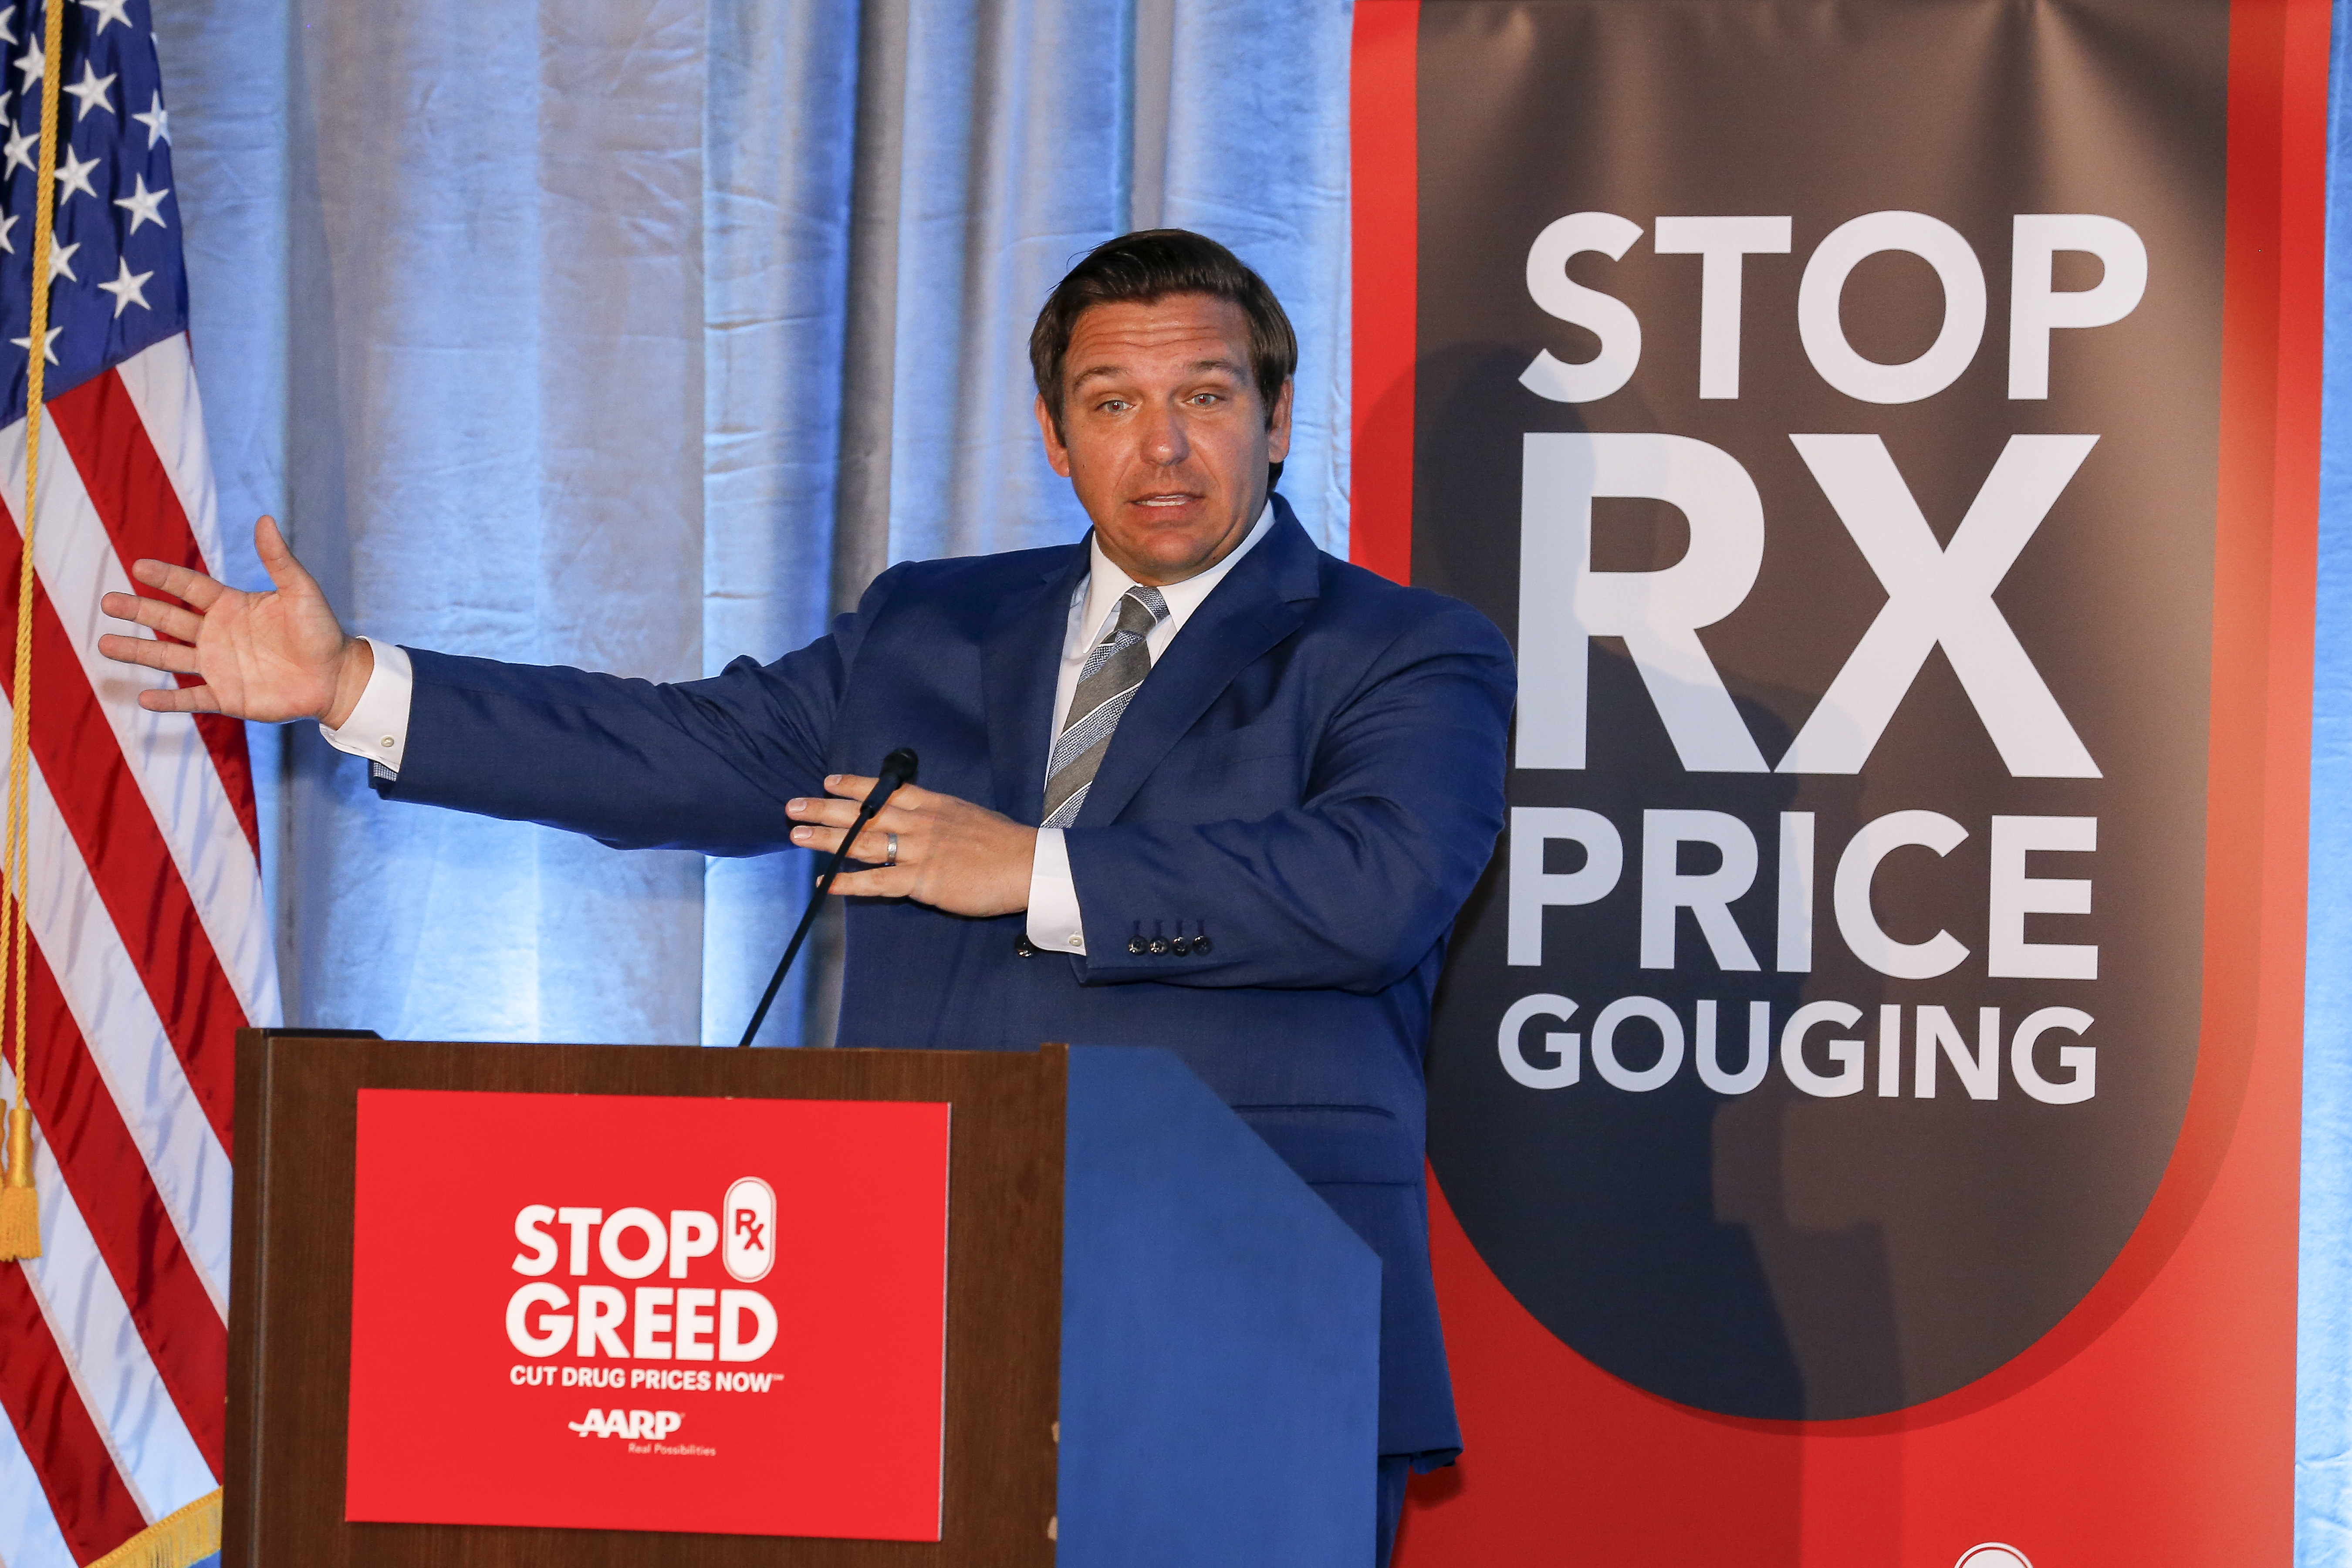 Florida Governor Ron DeSantis addresses the audience of the first of a series of "u201cWe Hear You"u201d Town Halls to hear from older Americans about how the high cost of prescription drugs is affecting them at Florida State University's Turnbull Conference Center on April 23, 2019 in Tallahassee, Florida. (Photo by Don Juan Moore/Getty Images for AARP)